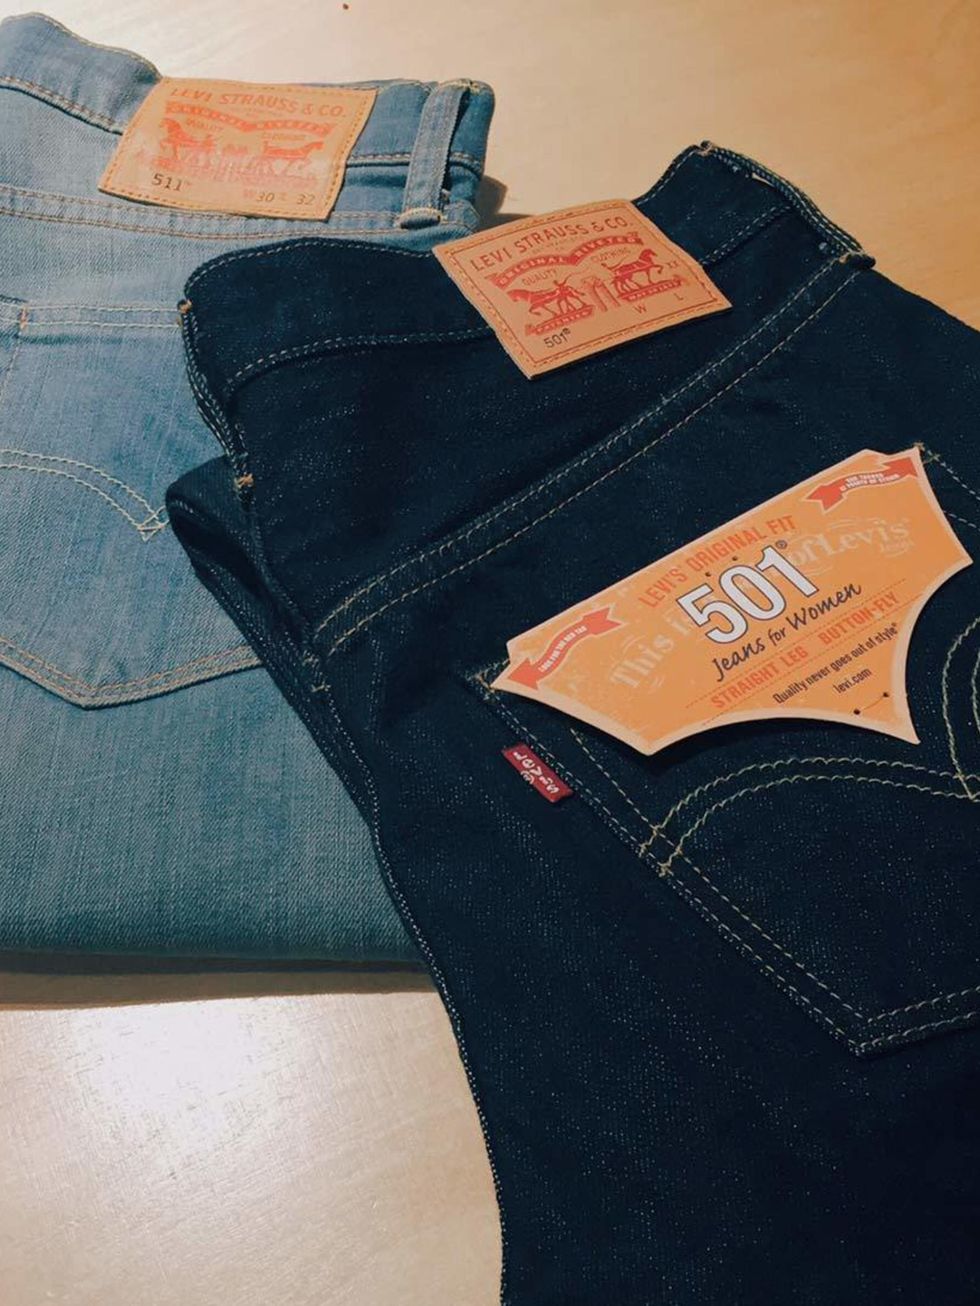 <p>It all started with a pair (or two) of classic Levi's jeans; <a href="http://www.levi.co.uk/GB/en_GB/womens-jeans/p/125010208" target="_blank">these selvedge 501s</a> are our new favourites. </p>